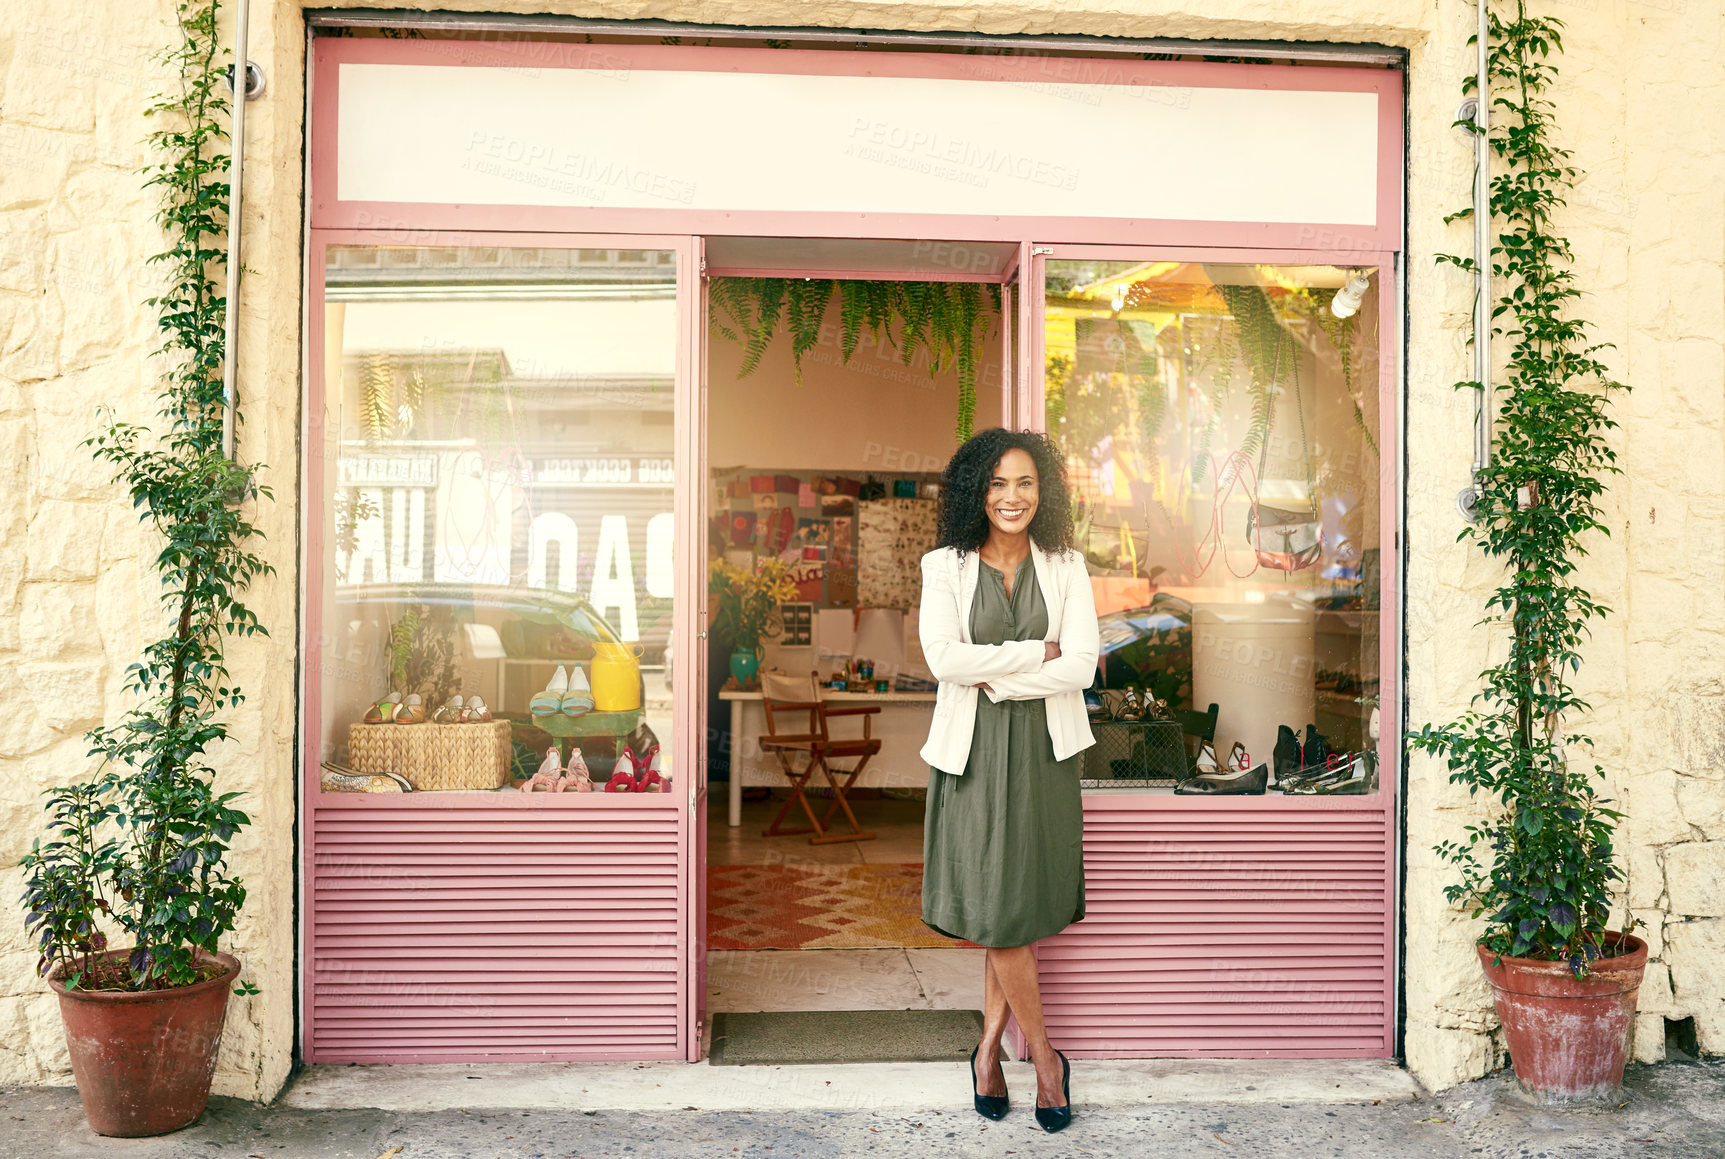 Buy stock photo Shot of a shoe shop owner standing in front of her shop